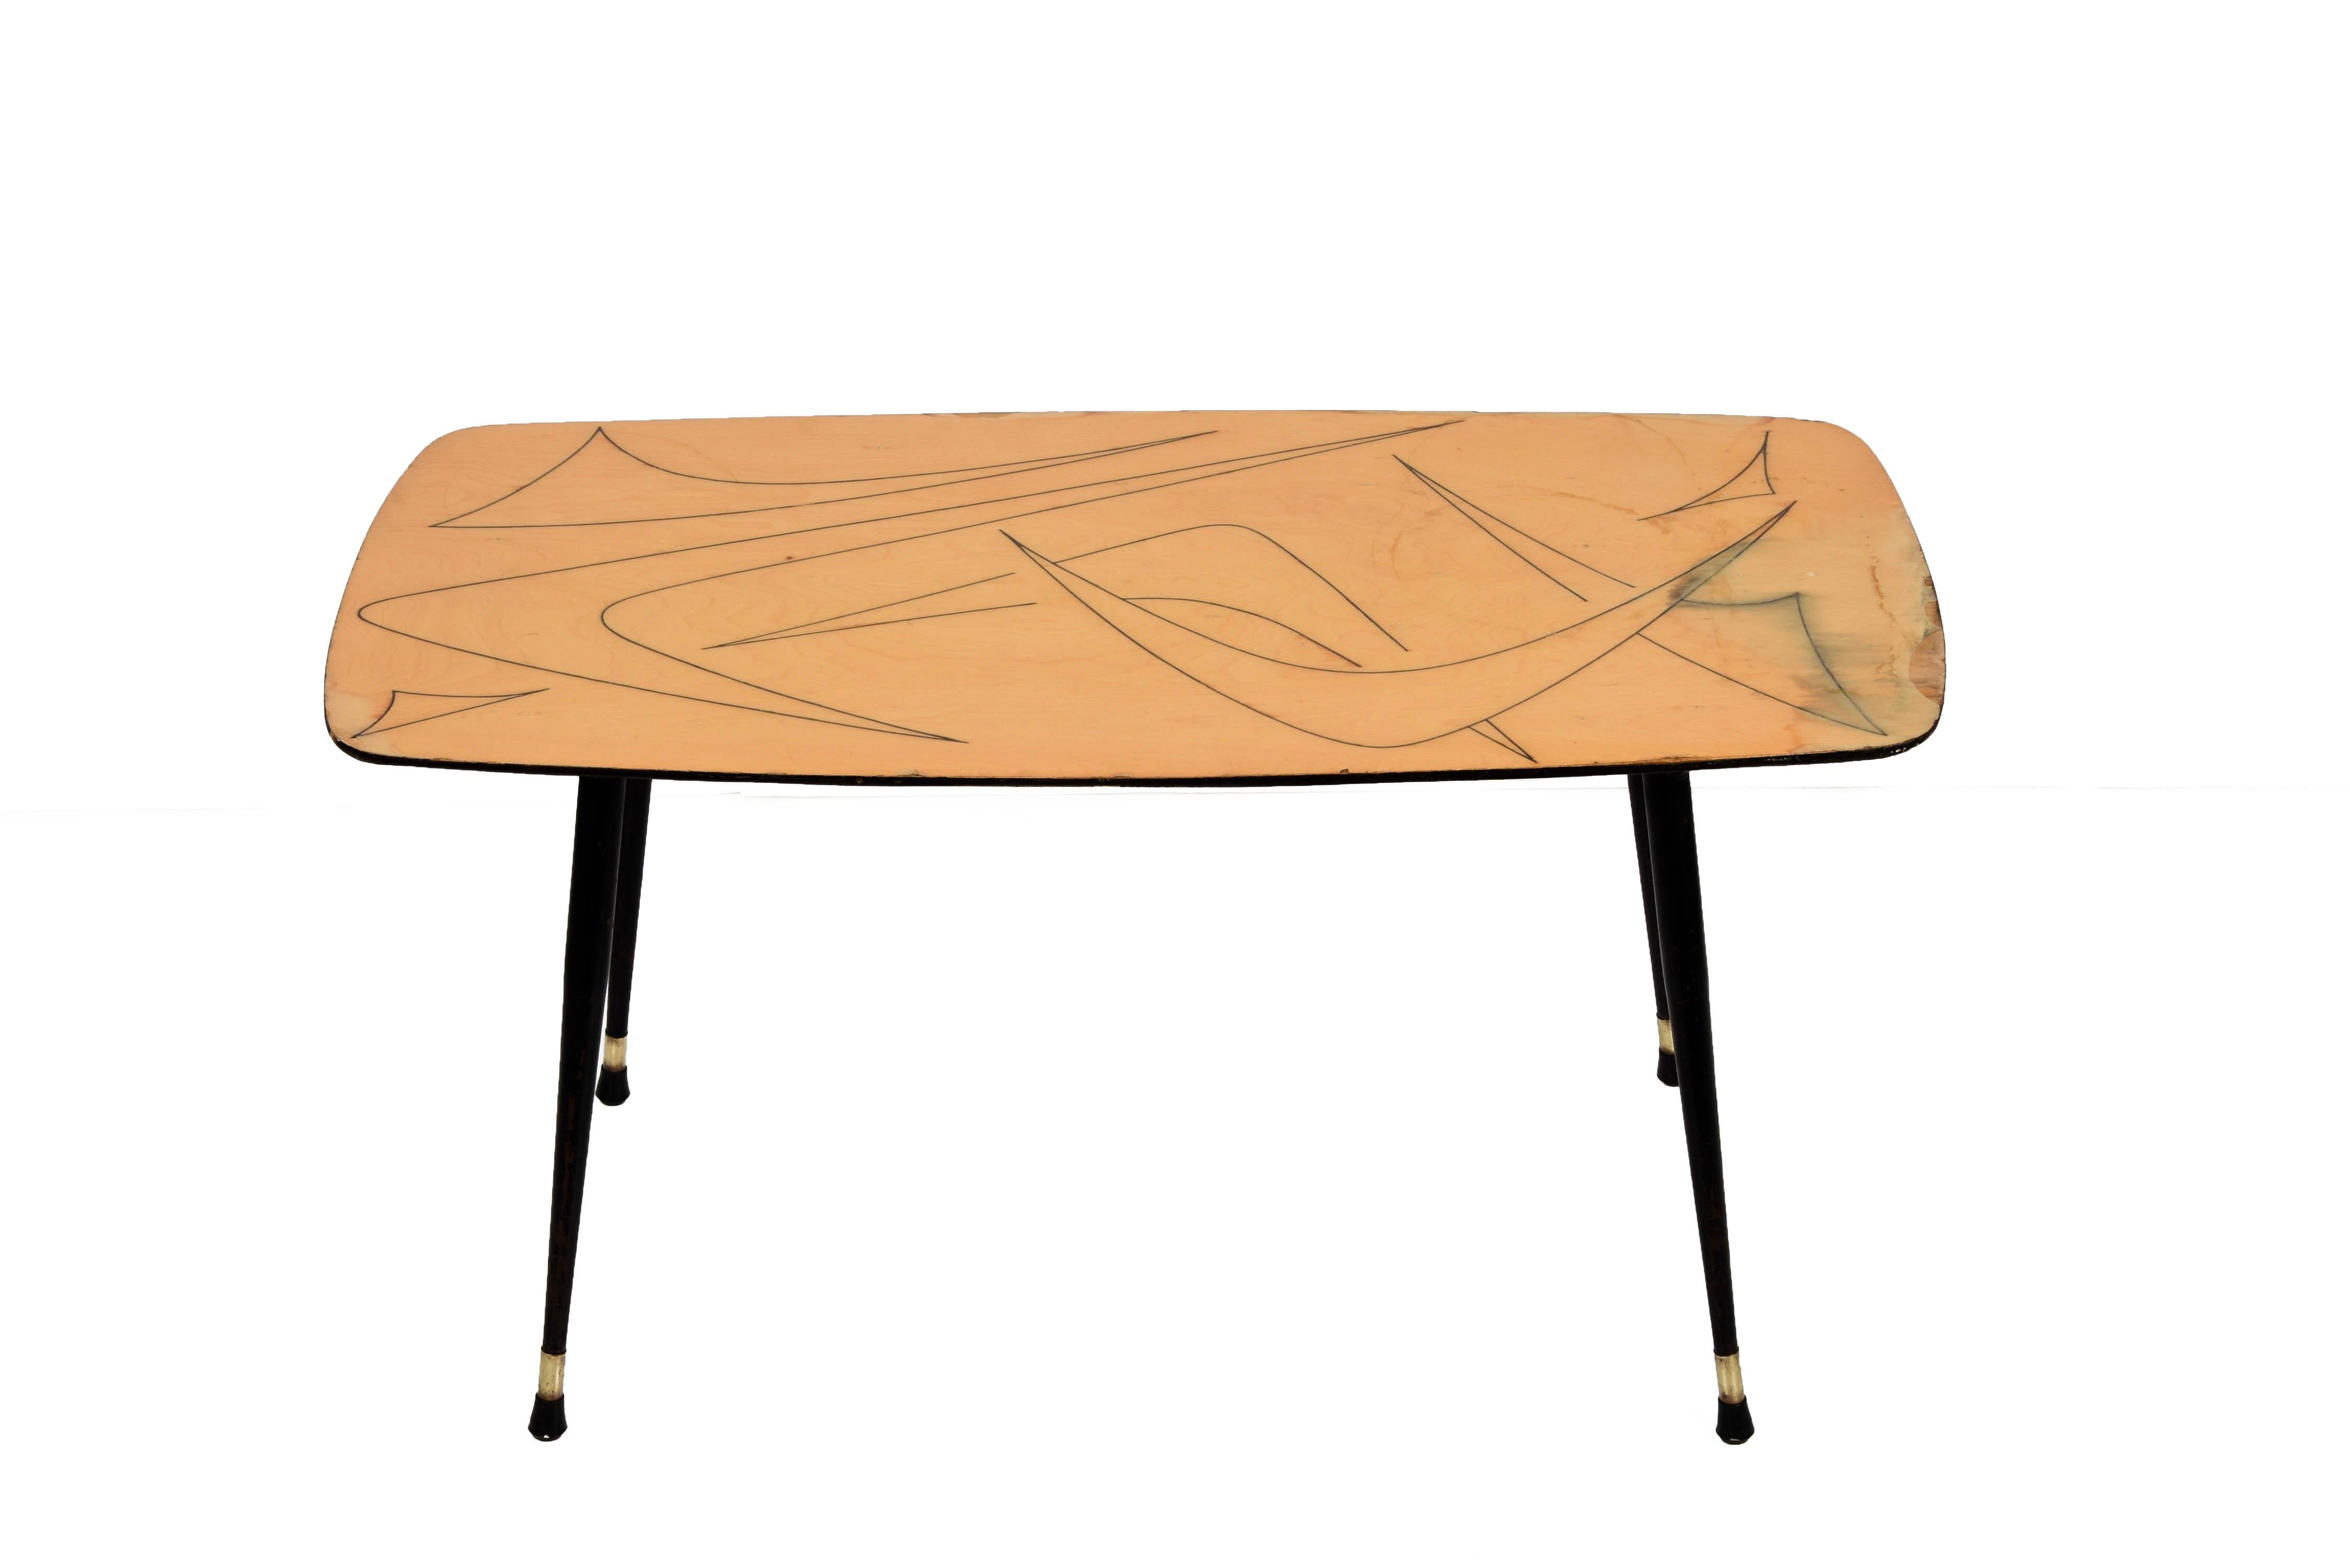 Midcentury Italian Painted Wood, Brass and Black Metal Coffee Table, 1950s For Sale 4